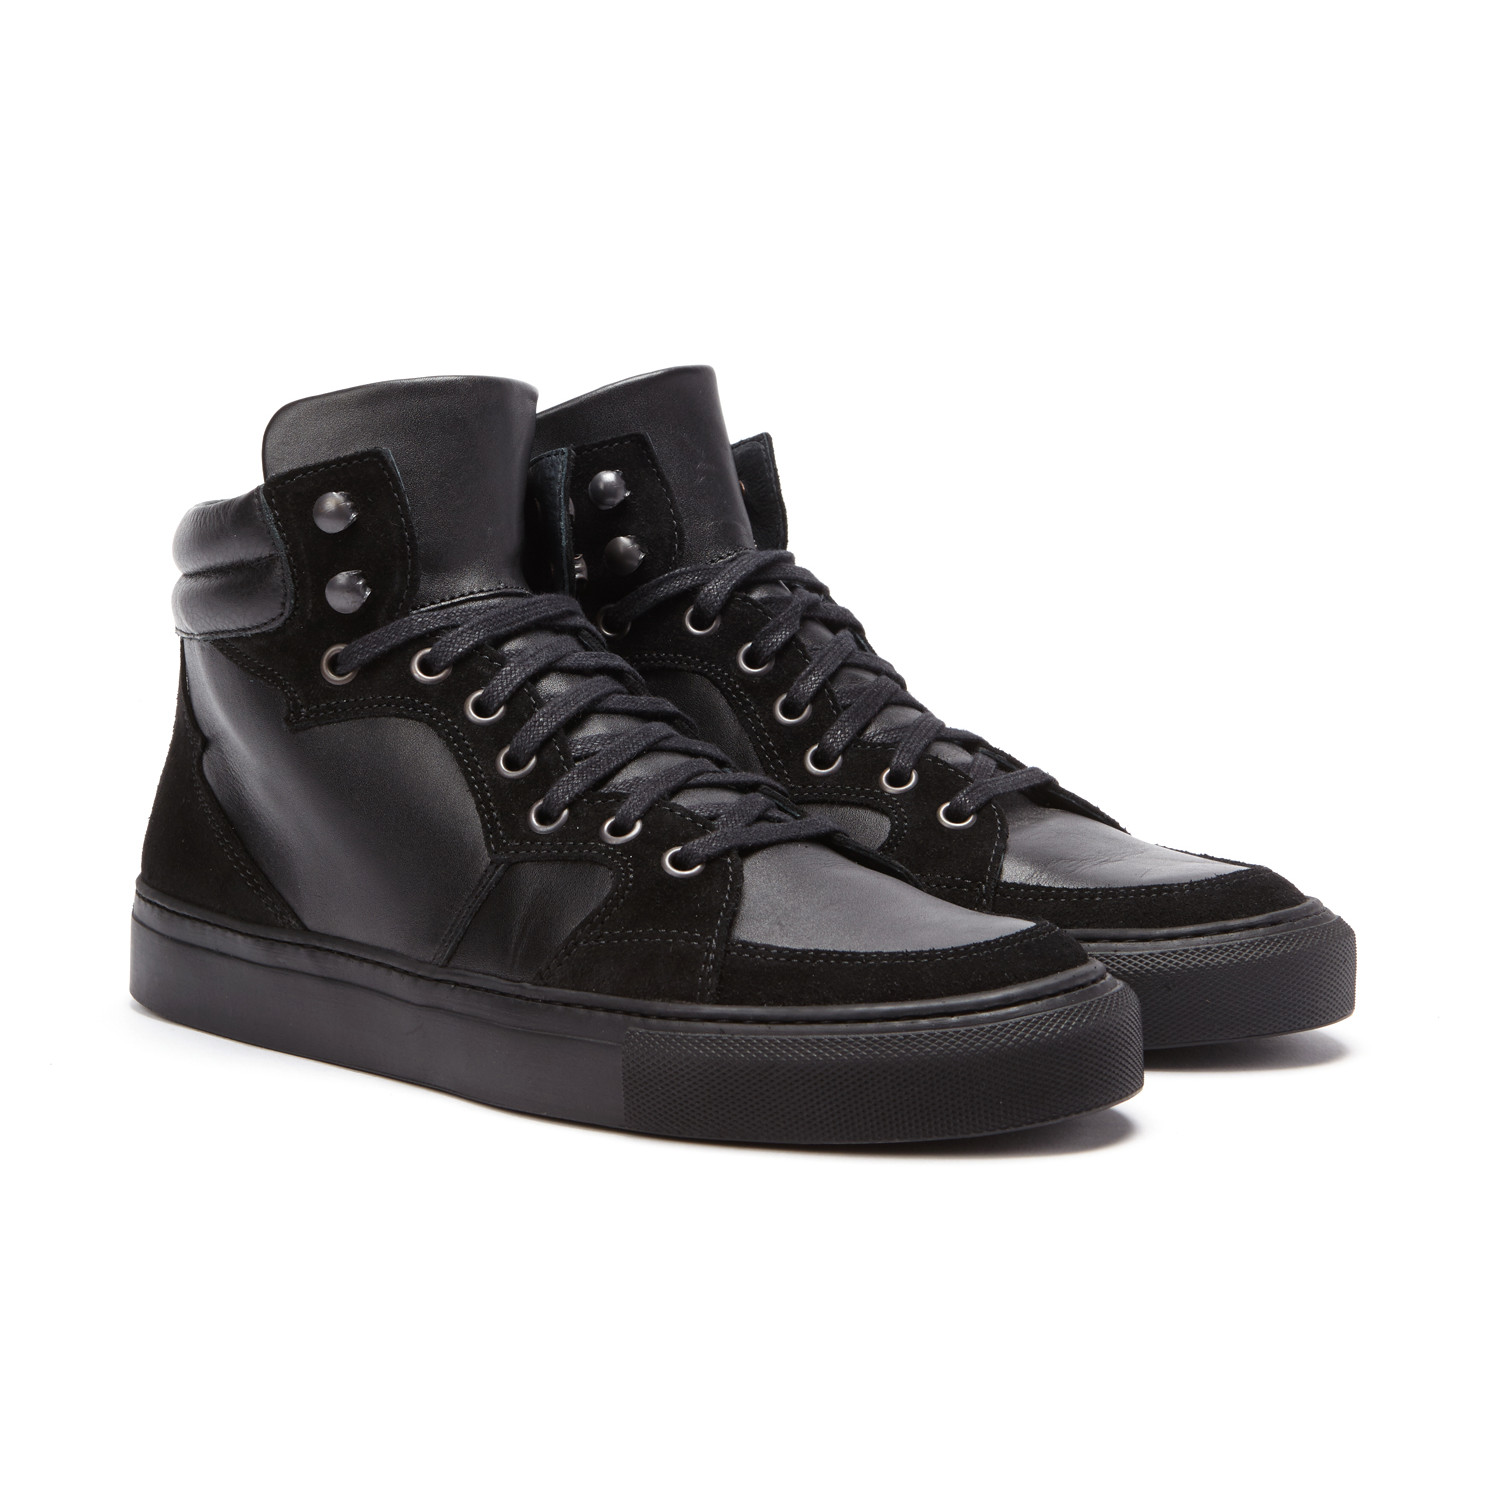 Leather + Suede High Top Trainers // Black (Euro: 42) - The Kooples ...